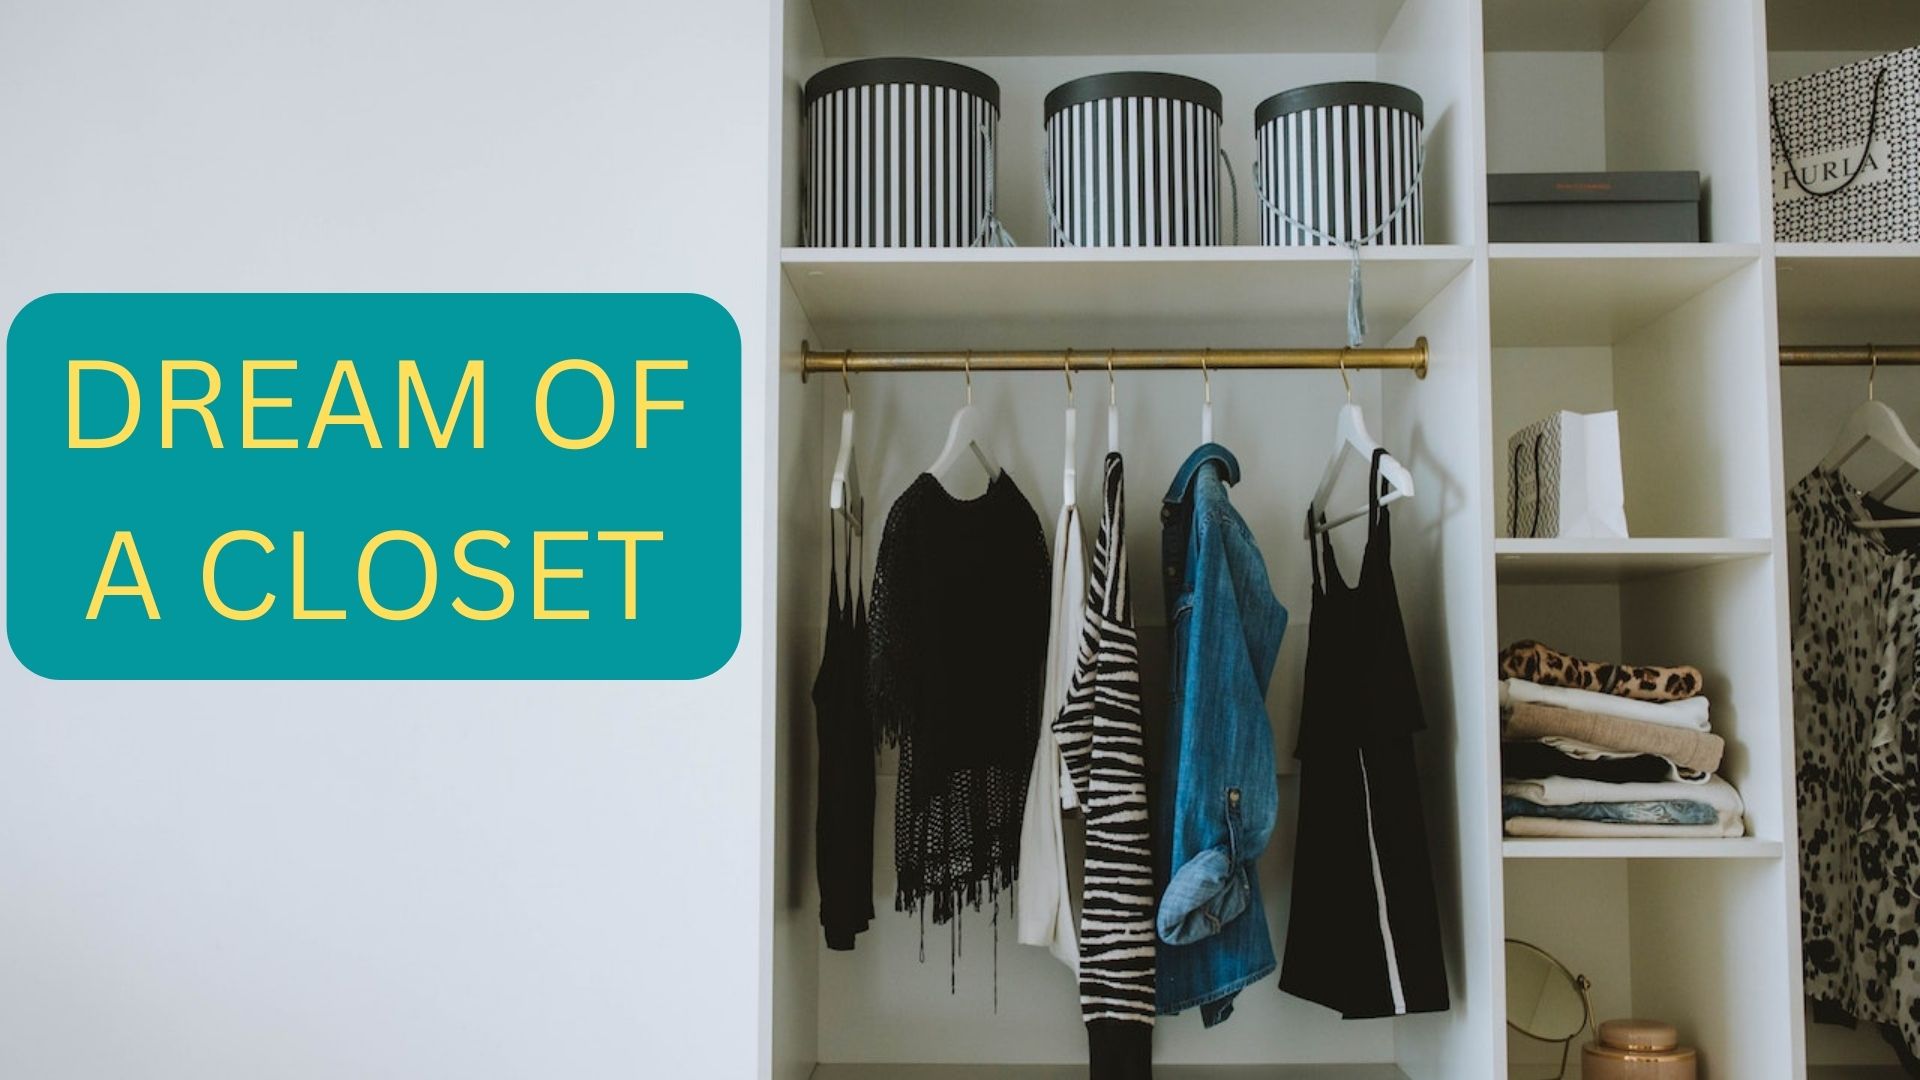 Dream Of A Closet - Show Things About Yourself That You Hide